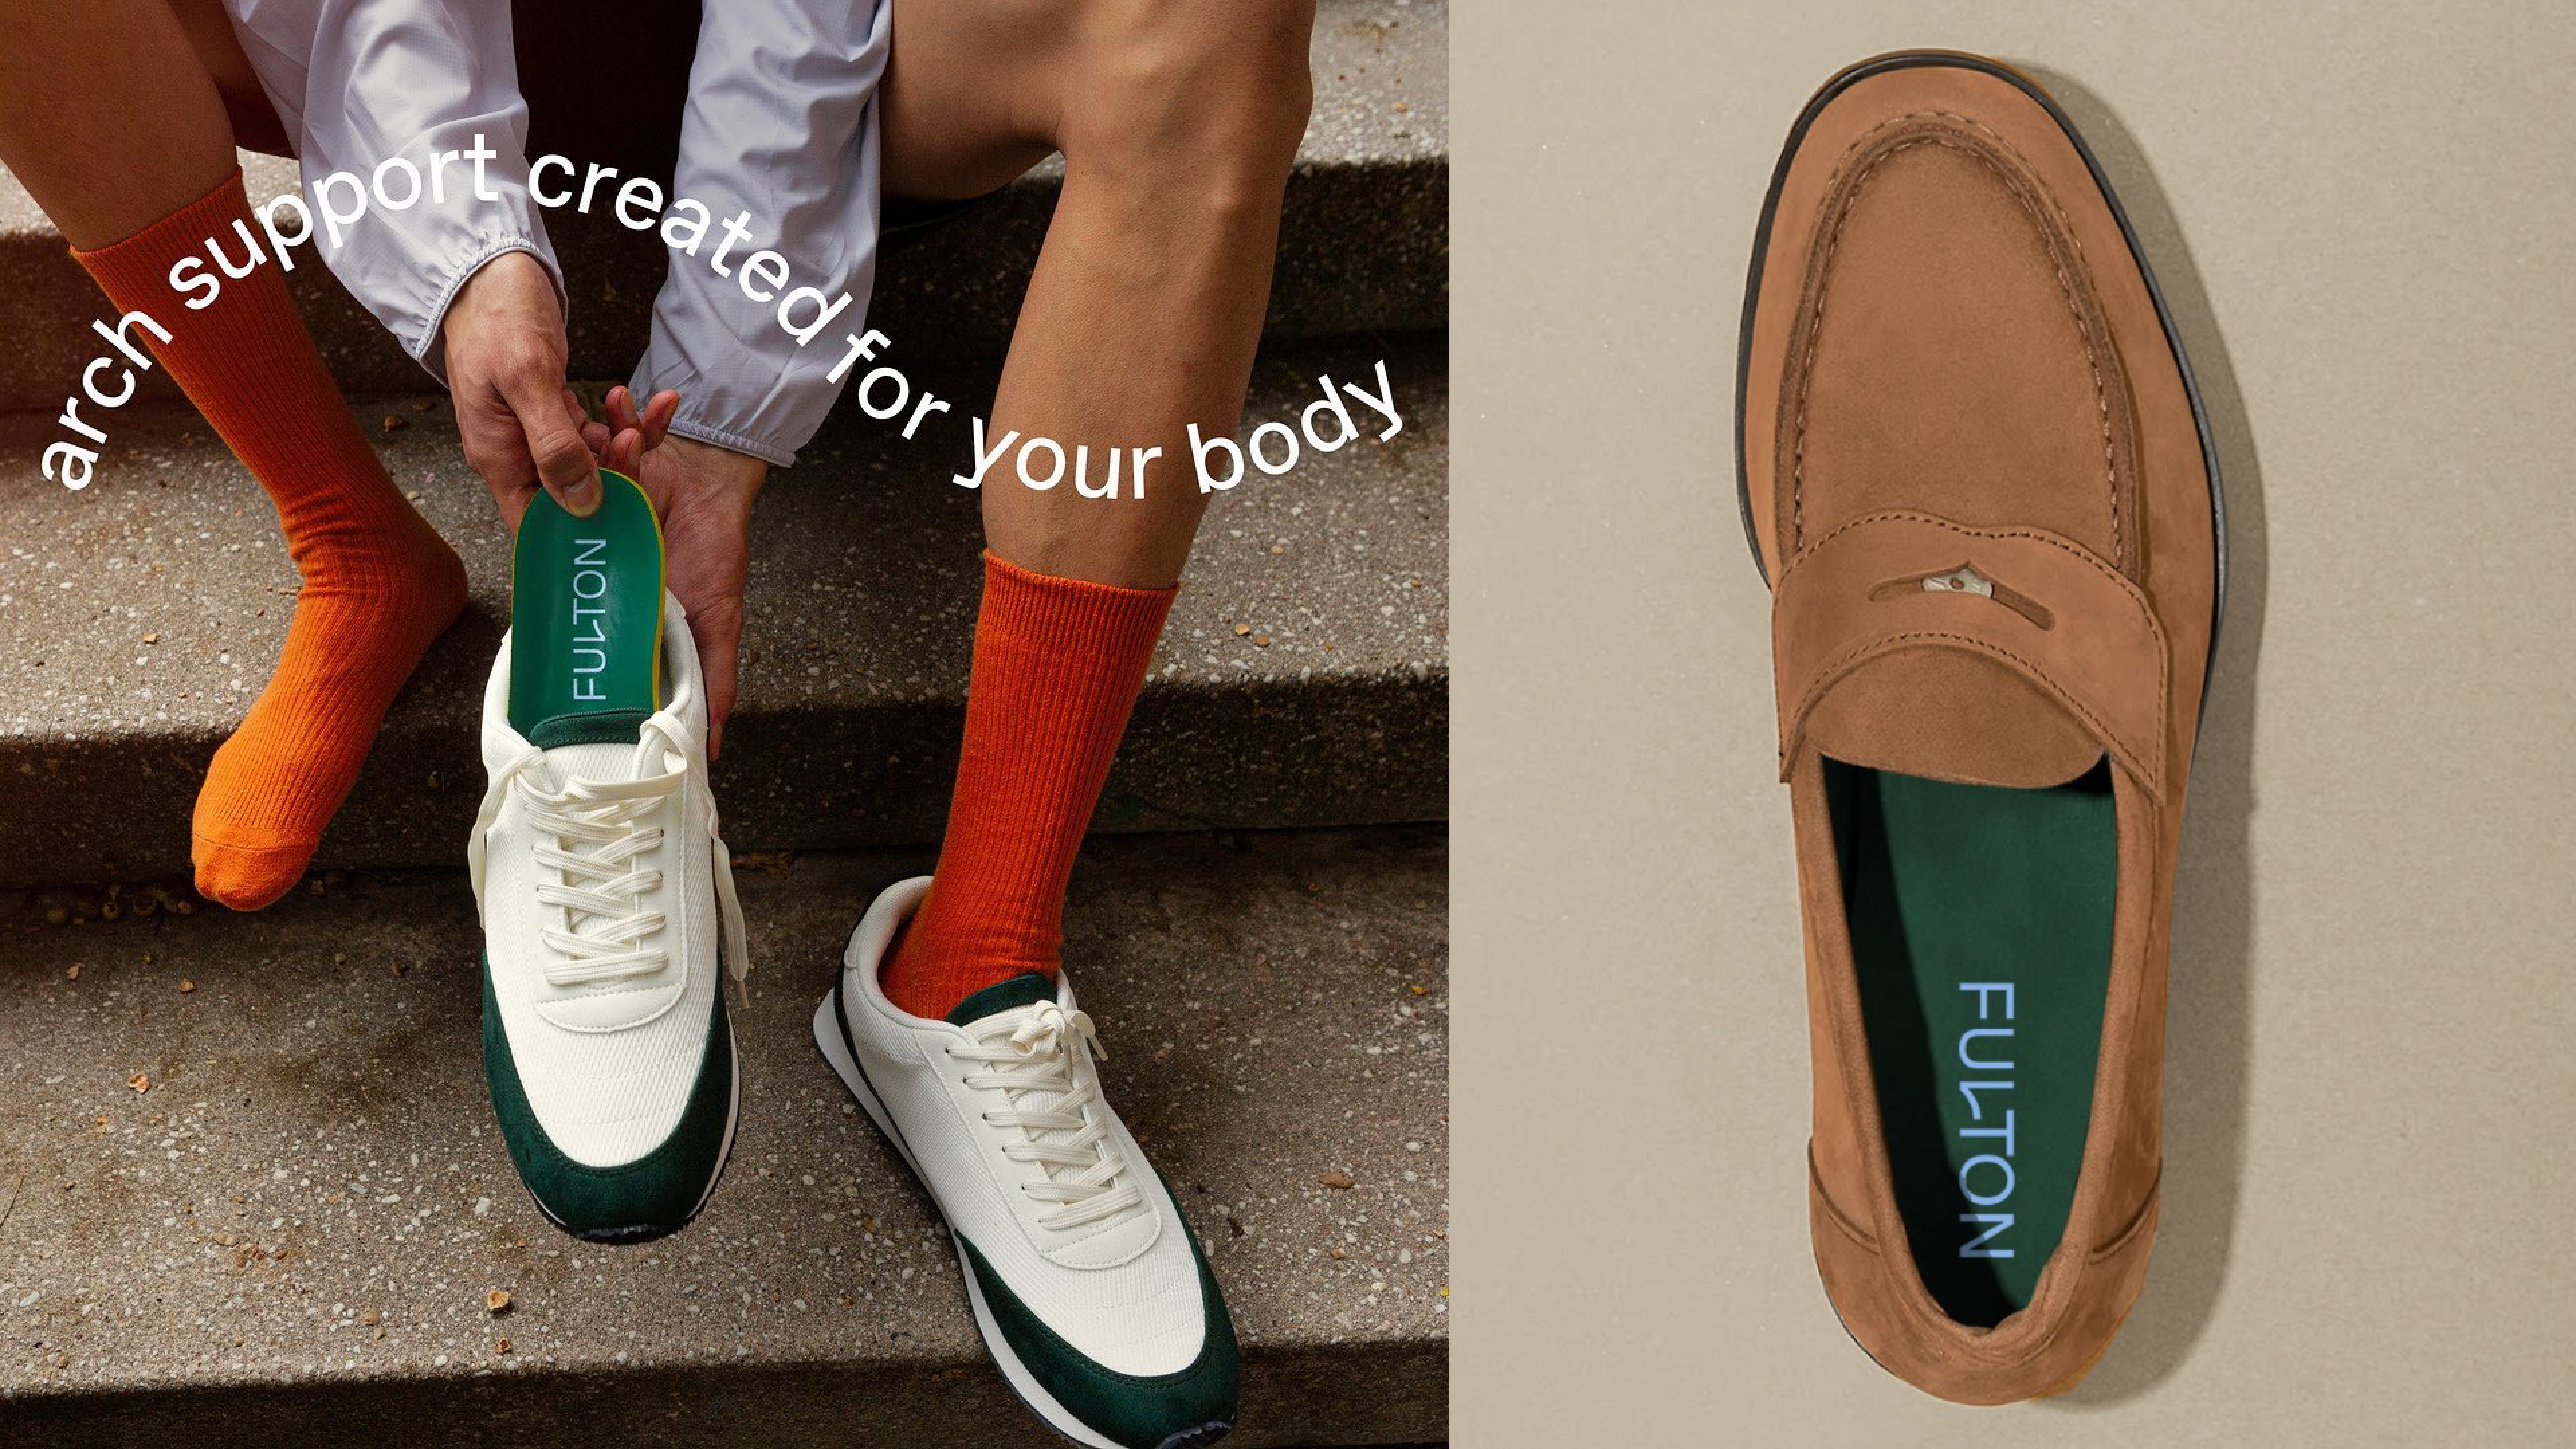 cork insoles for your shoes